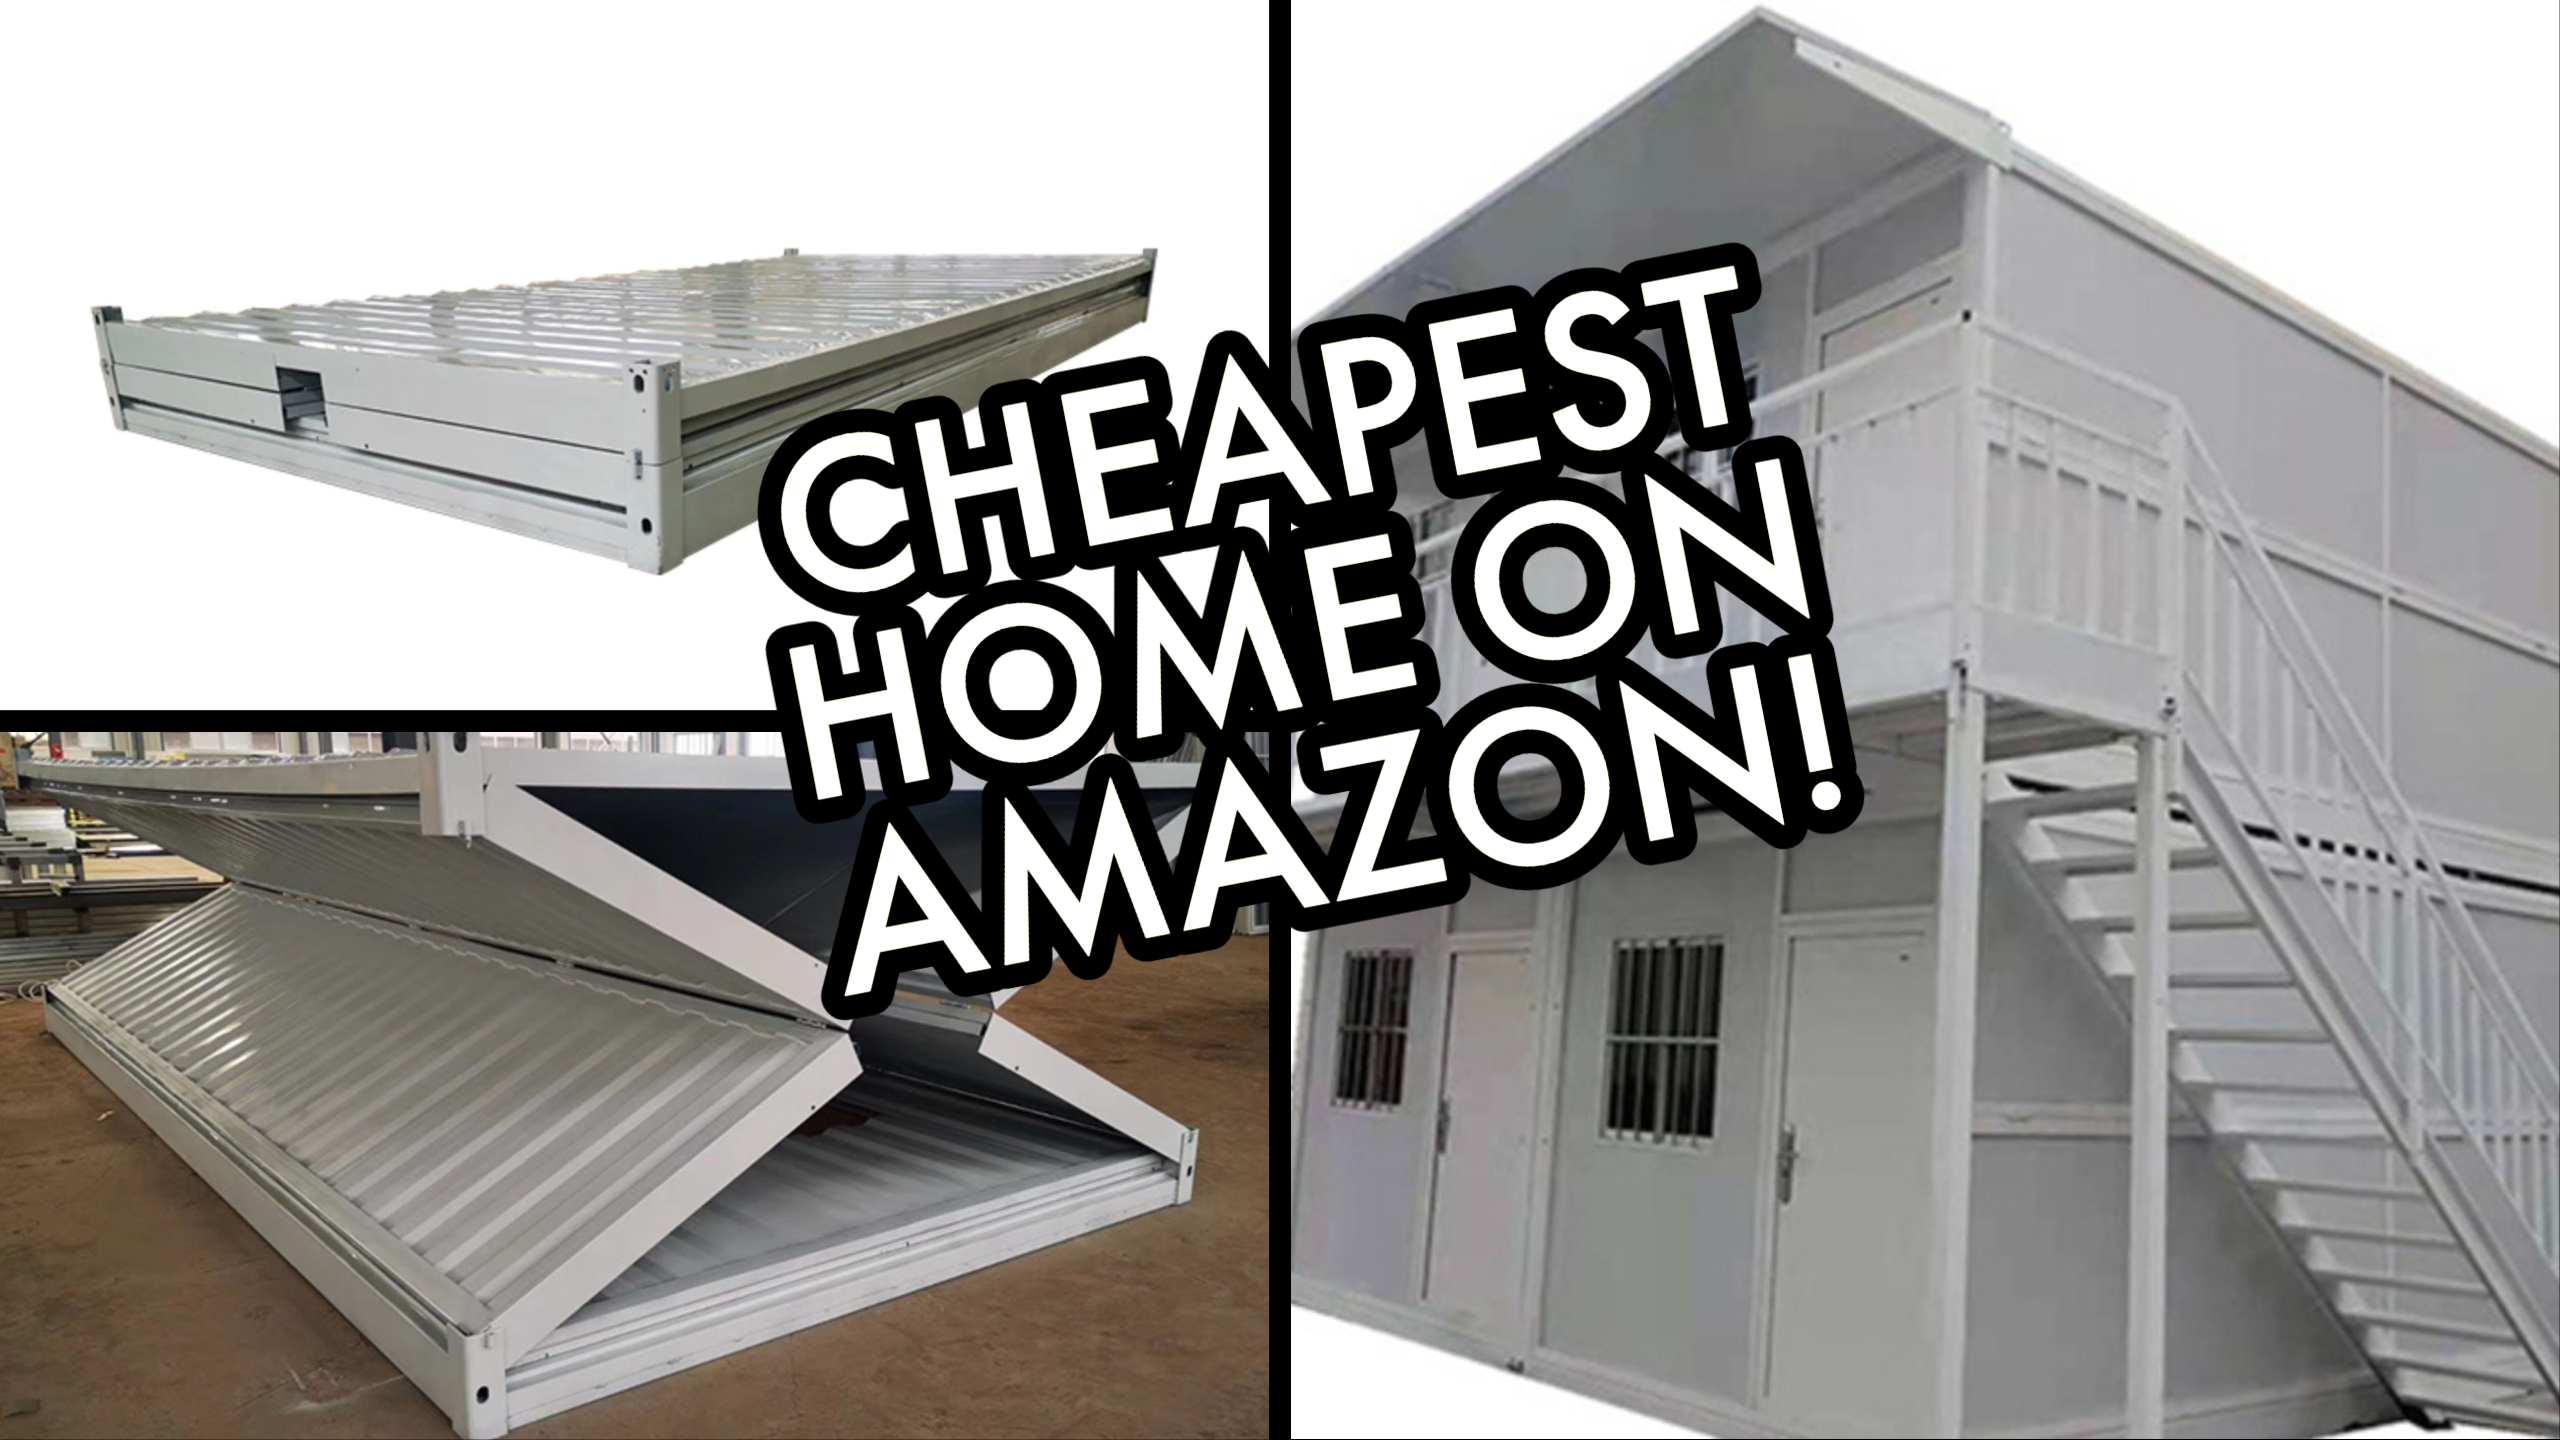 https://s1.cdn.autoevolution.com/images/news/this-is-the-cheapest-prefabricated-home-on-amazon-and-it-does-things-for-just-3400-217115_1.jpg